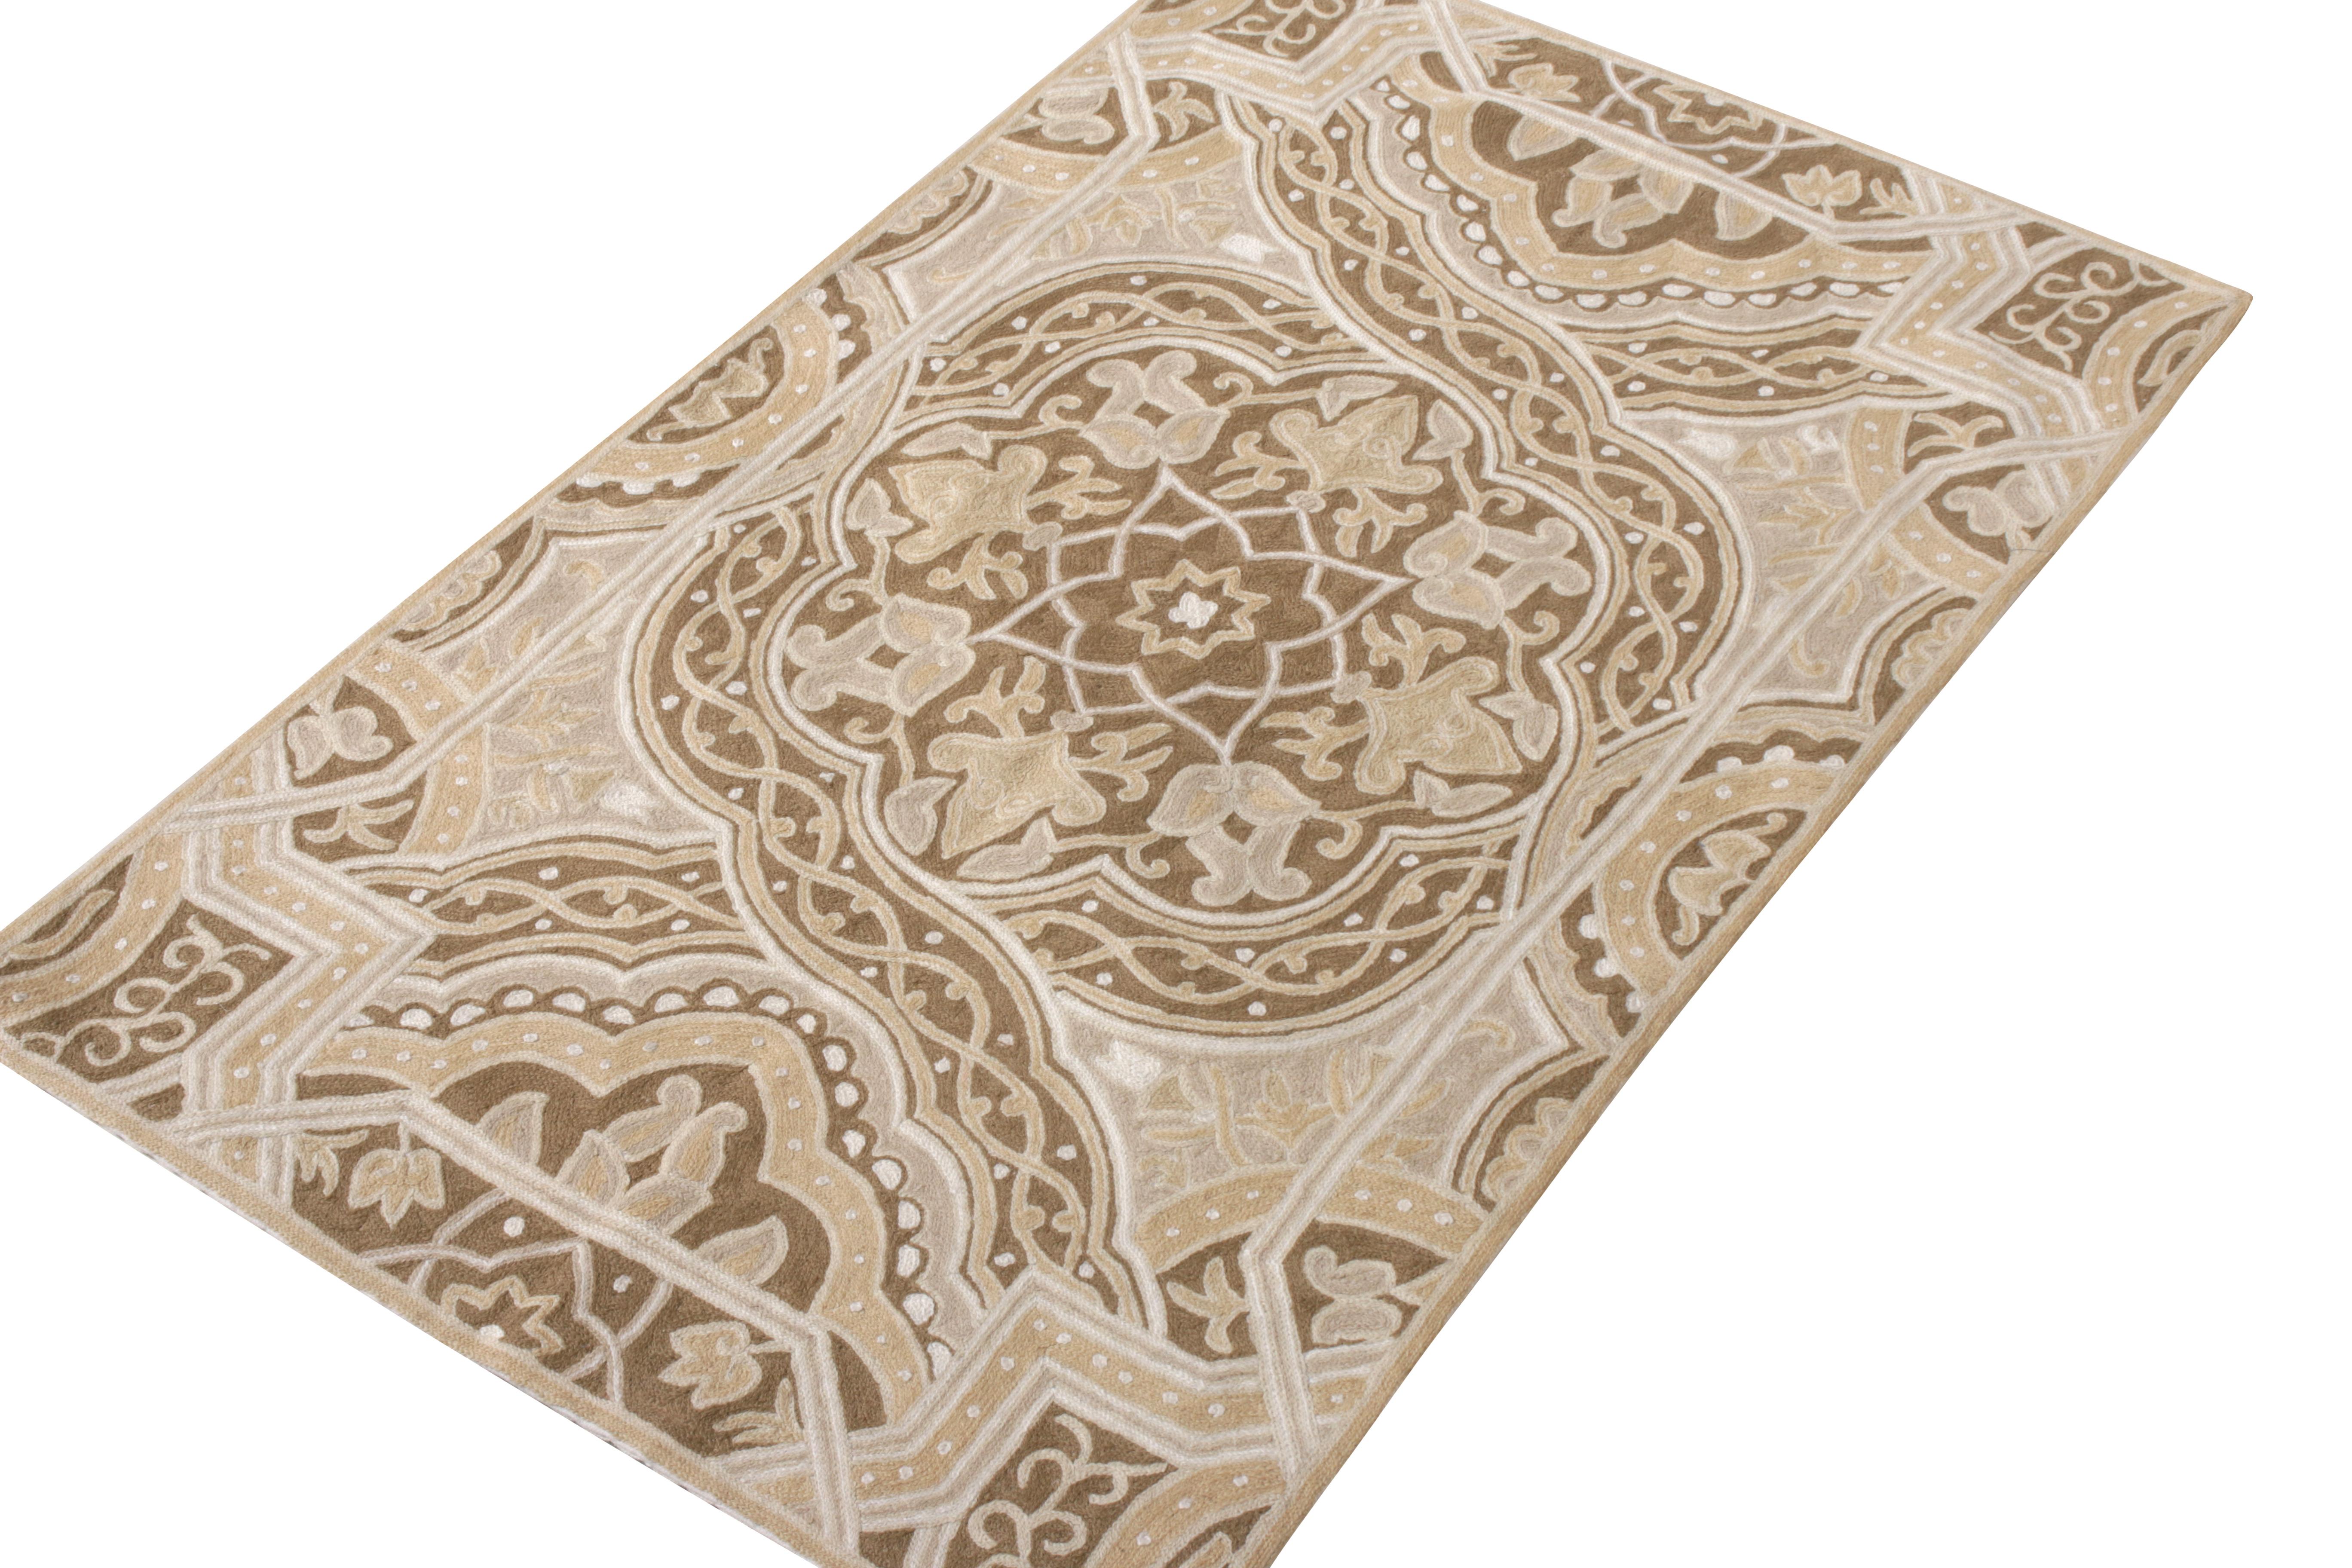 A luscious 3x4 rug in sophisticated hues of beige-brown and white joining Rug & Kilim’s Modern collection. Finely woven in with a meticulous chain stitch marrying a rich colourway and floral pattern, the rug relishes a splendid play of movement and